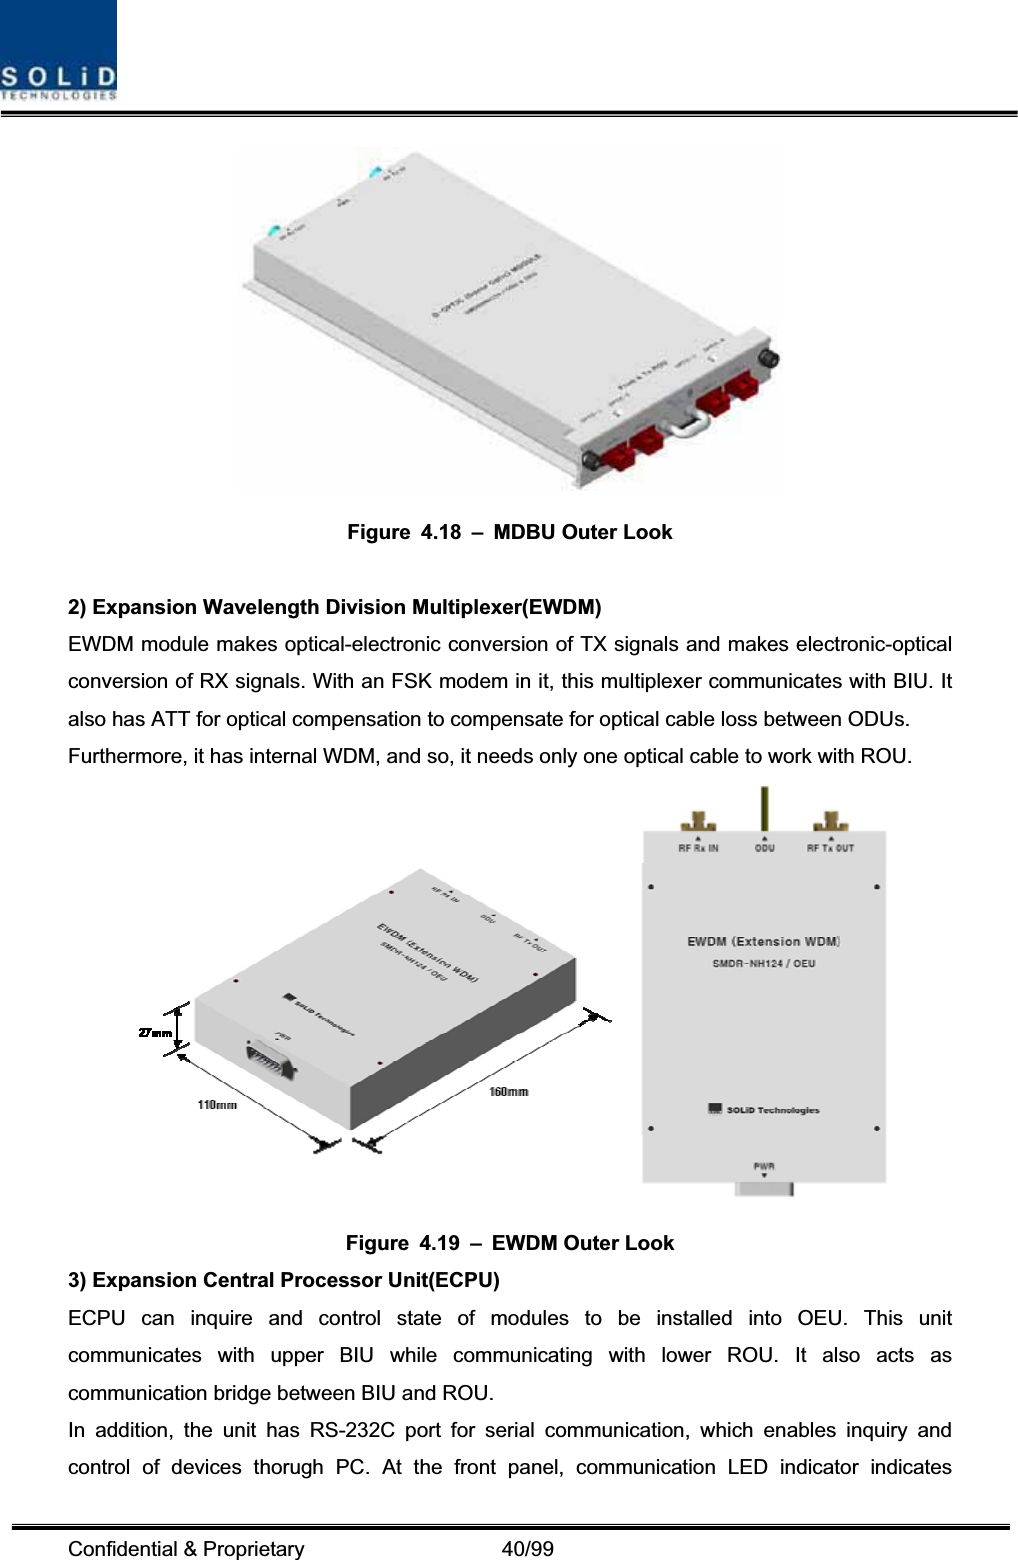 Confidential &amp; Proprietary                   40/99 Figure 4.18 – MDBU Outer Look 2) Expansion Wavelength Division Multiplexer(EWDM) EWDM module makes optical-electronic conversion of TX signals and makes electronic-optical conversion of RX signals. With an FSK modem in it, this multiplexer communicates with BIU. It also has ATT for optical compensation to compensate for optical cable loss between ODUs. Furthermore, it has internal WDM, and so, it needs only one optical cable to work with ROU. Figure 4.19 – EWDM Outer Look 3) Expansion Central Processor Unit(ECPU) ECPU can inquire and control state of modules to be installed into OEU. This unit communicates with upper BIU while communicating with lower ROU. It also acts as communication bridge between BIU and ROU. In addition, the unit has RS-232C port for serial communication, which enables inquiry and control of devices thorugh PC. At the front panel, communication LED indicator indicates 